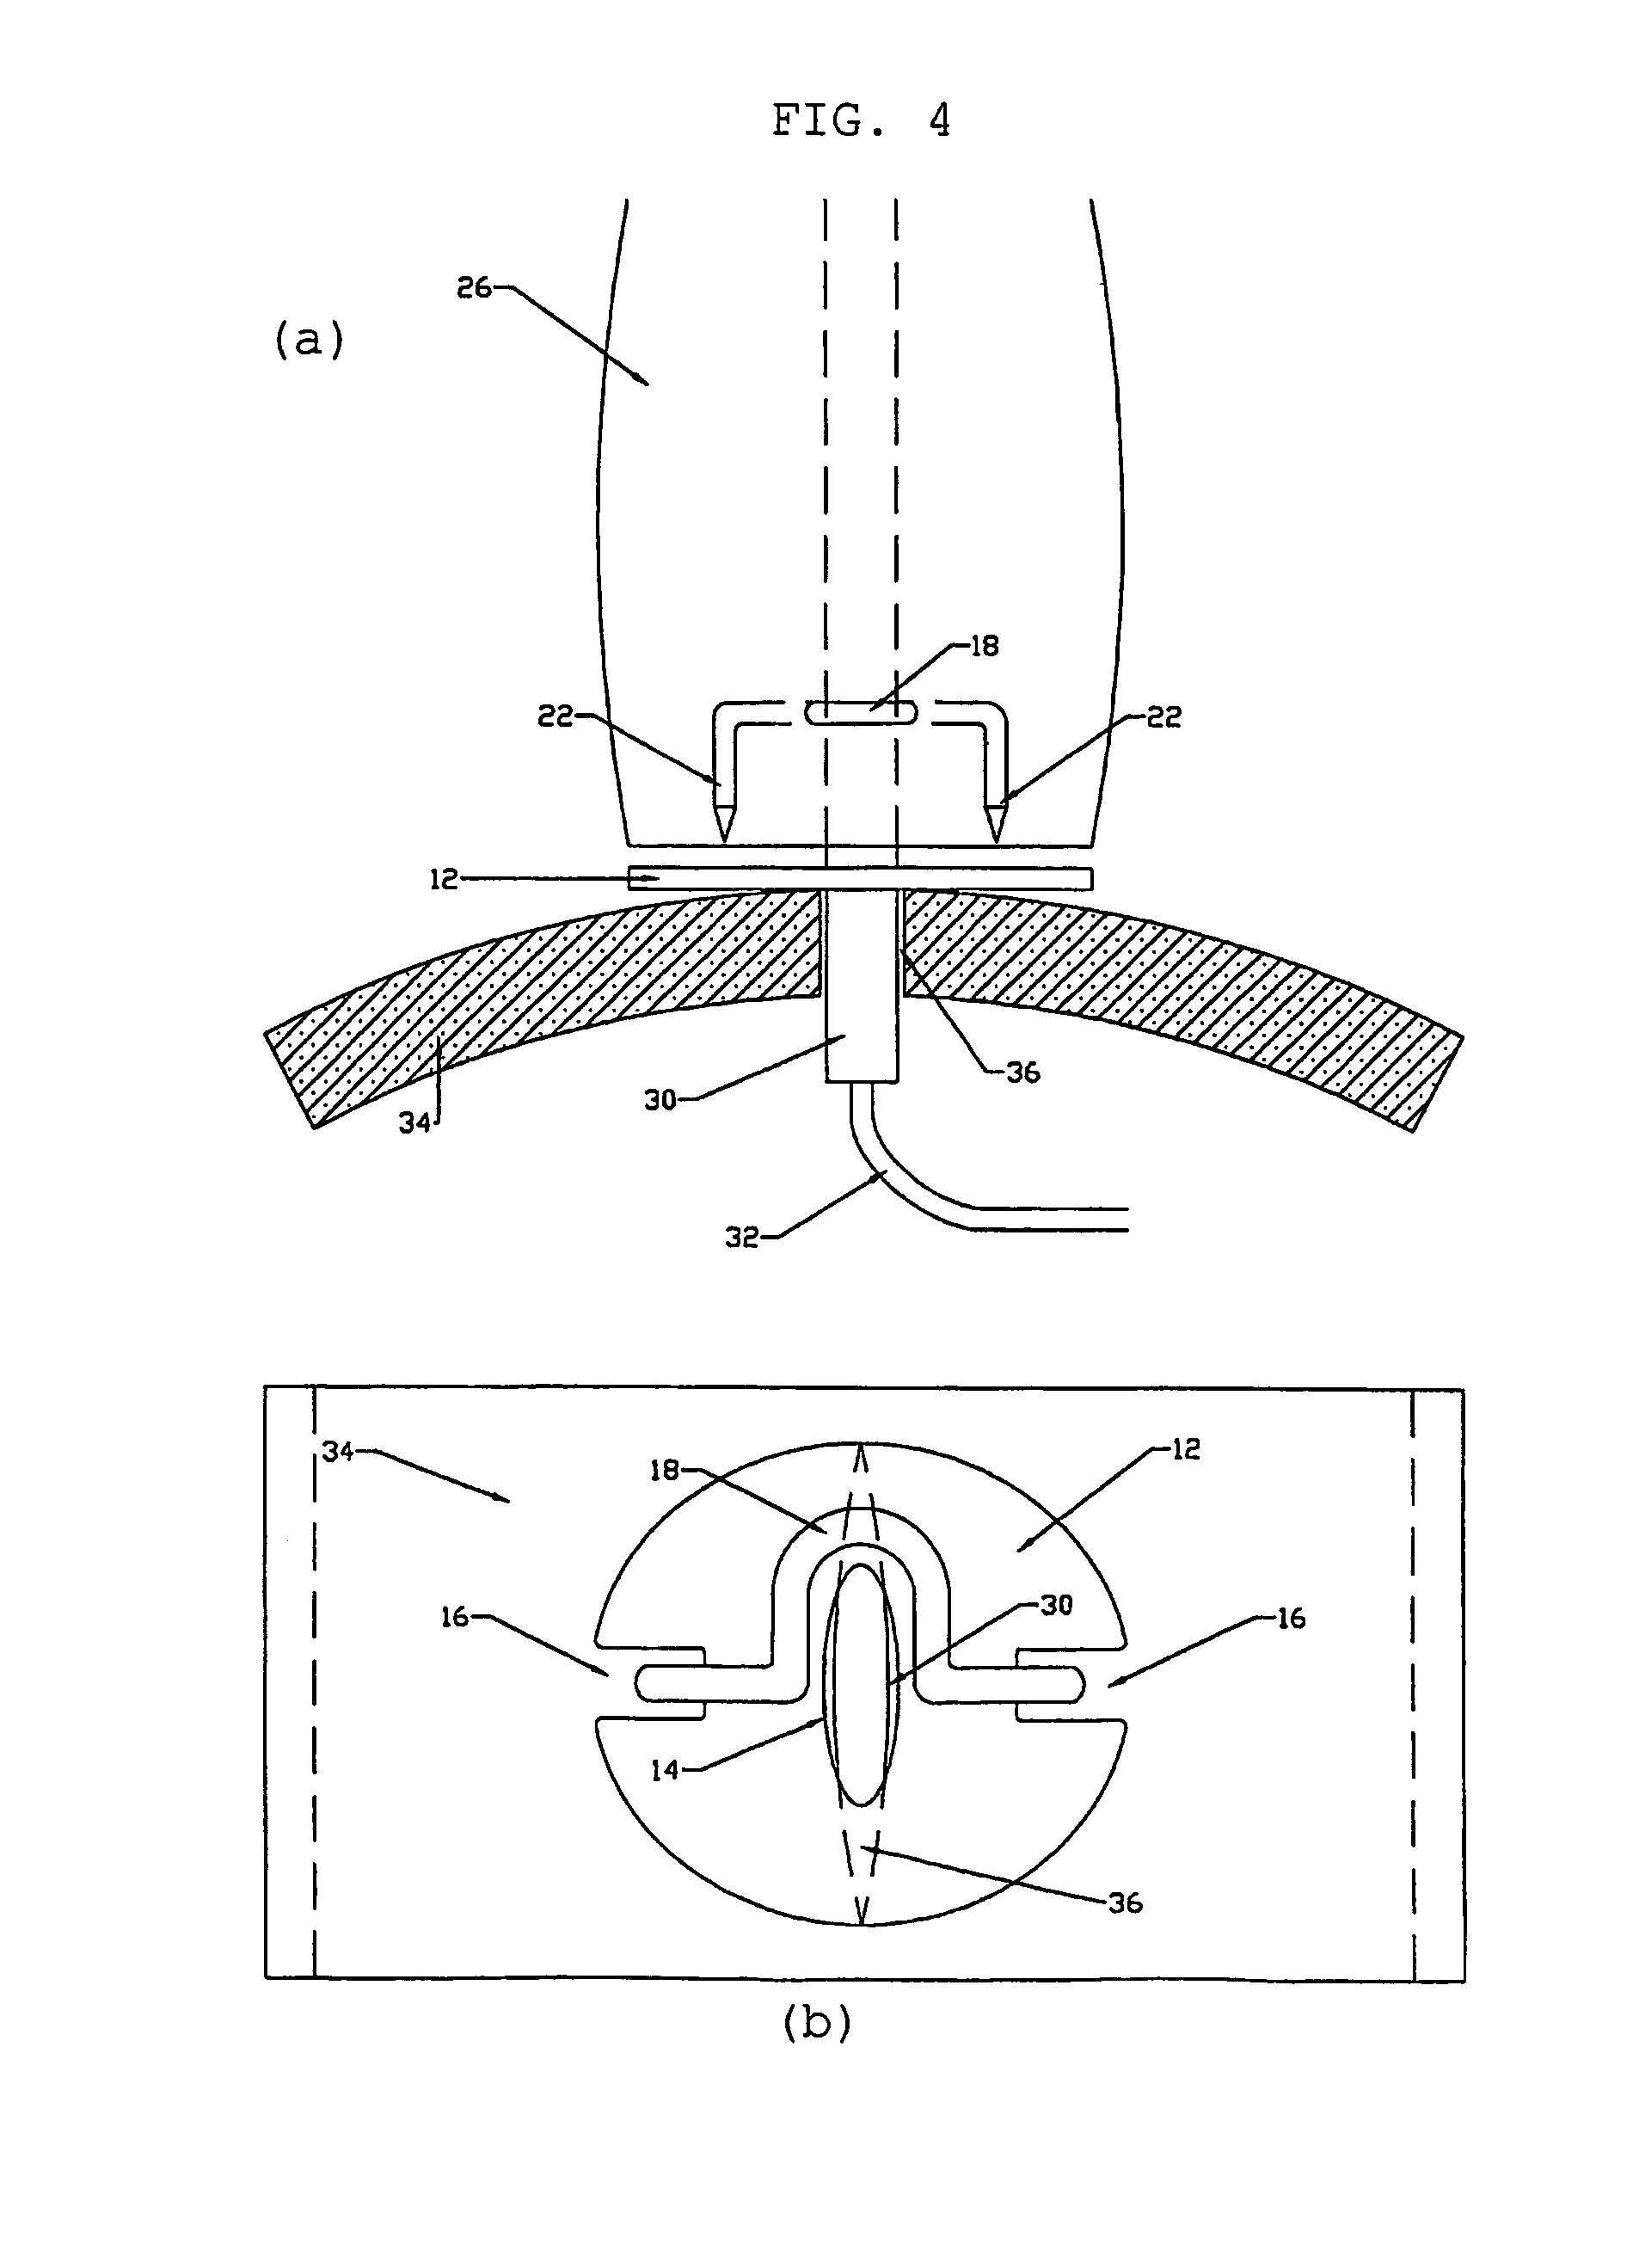 Surgical stapling device and method